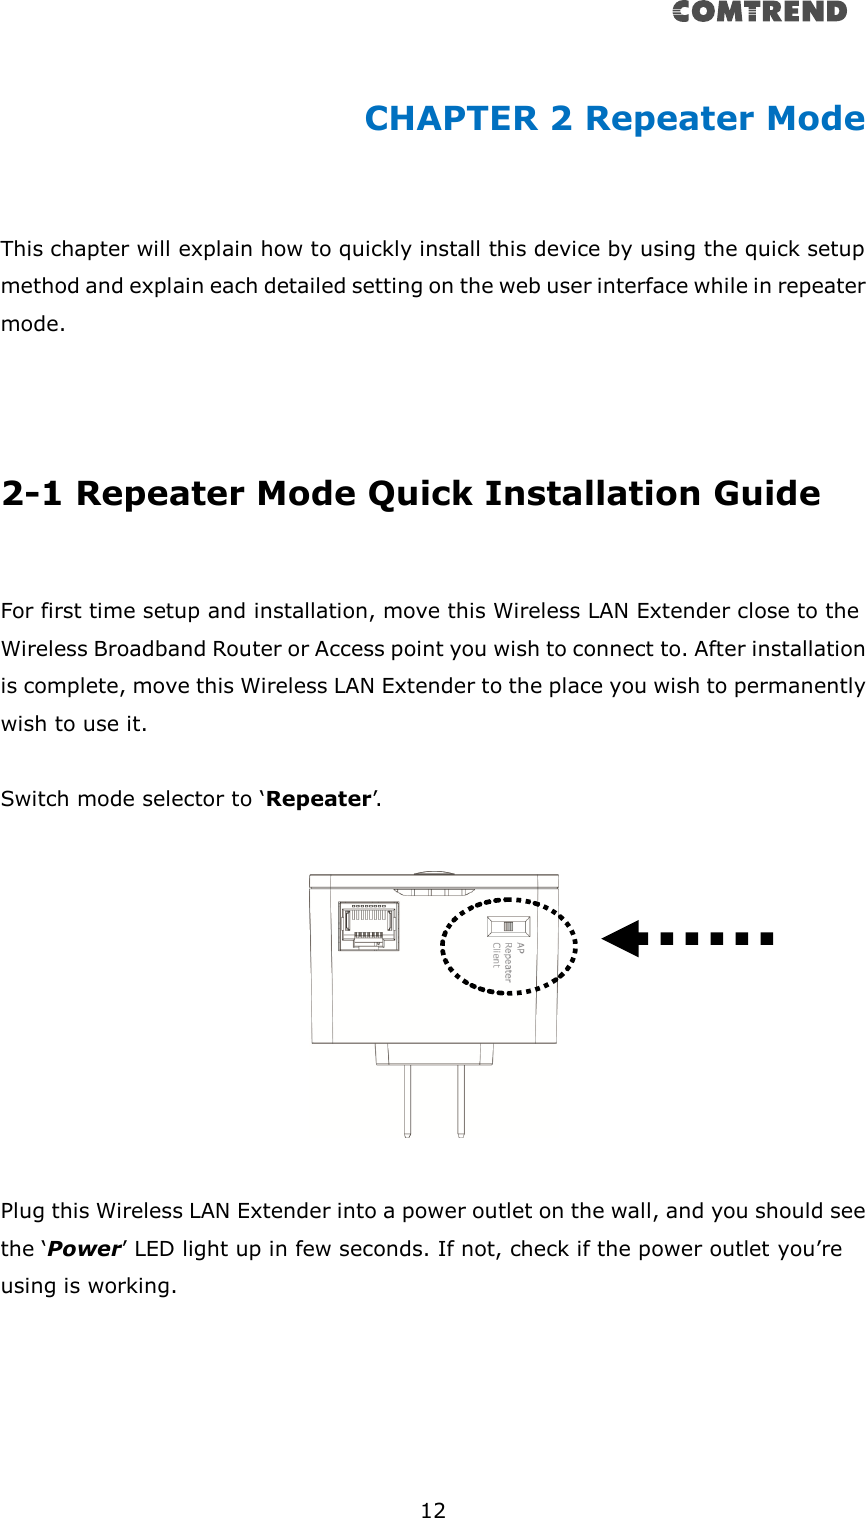       12  CHAPTER 2 Repeater Mode  This chapter will explain how to quickly install this device by using the quick setup method and explain each detailed setting on the web user interface while in repeater mode.     2-1 Repeater Mode Quick Installation Guide  For first time setup and installation, move this Wireless LAN Extender close to the Wireless Broadband Router or Access point you wish to connect to. After installation is complete, move this Wireless LAN Extender to the place you wish to permanently wish to use it.  Switch mode selector to ‘Repeater’.     Plug this Wireless LAN Extender into a power outlet on the wall, and you should see the ‘Power’ LED light up in few seconds. If not, check if the power outlet you’re using is working.  